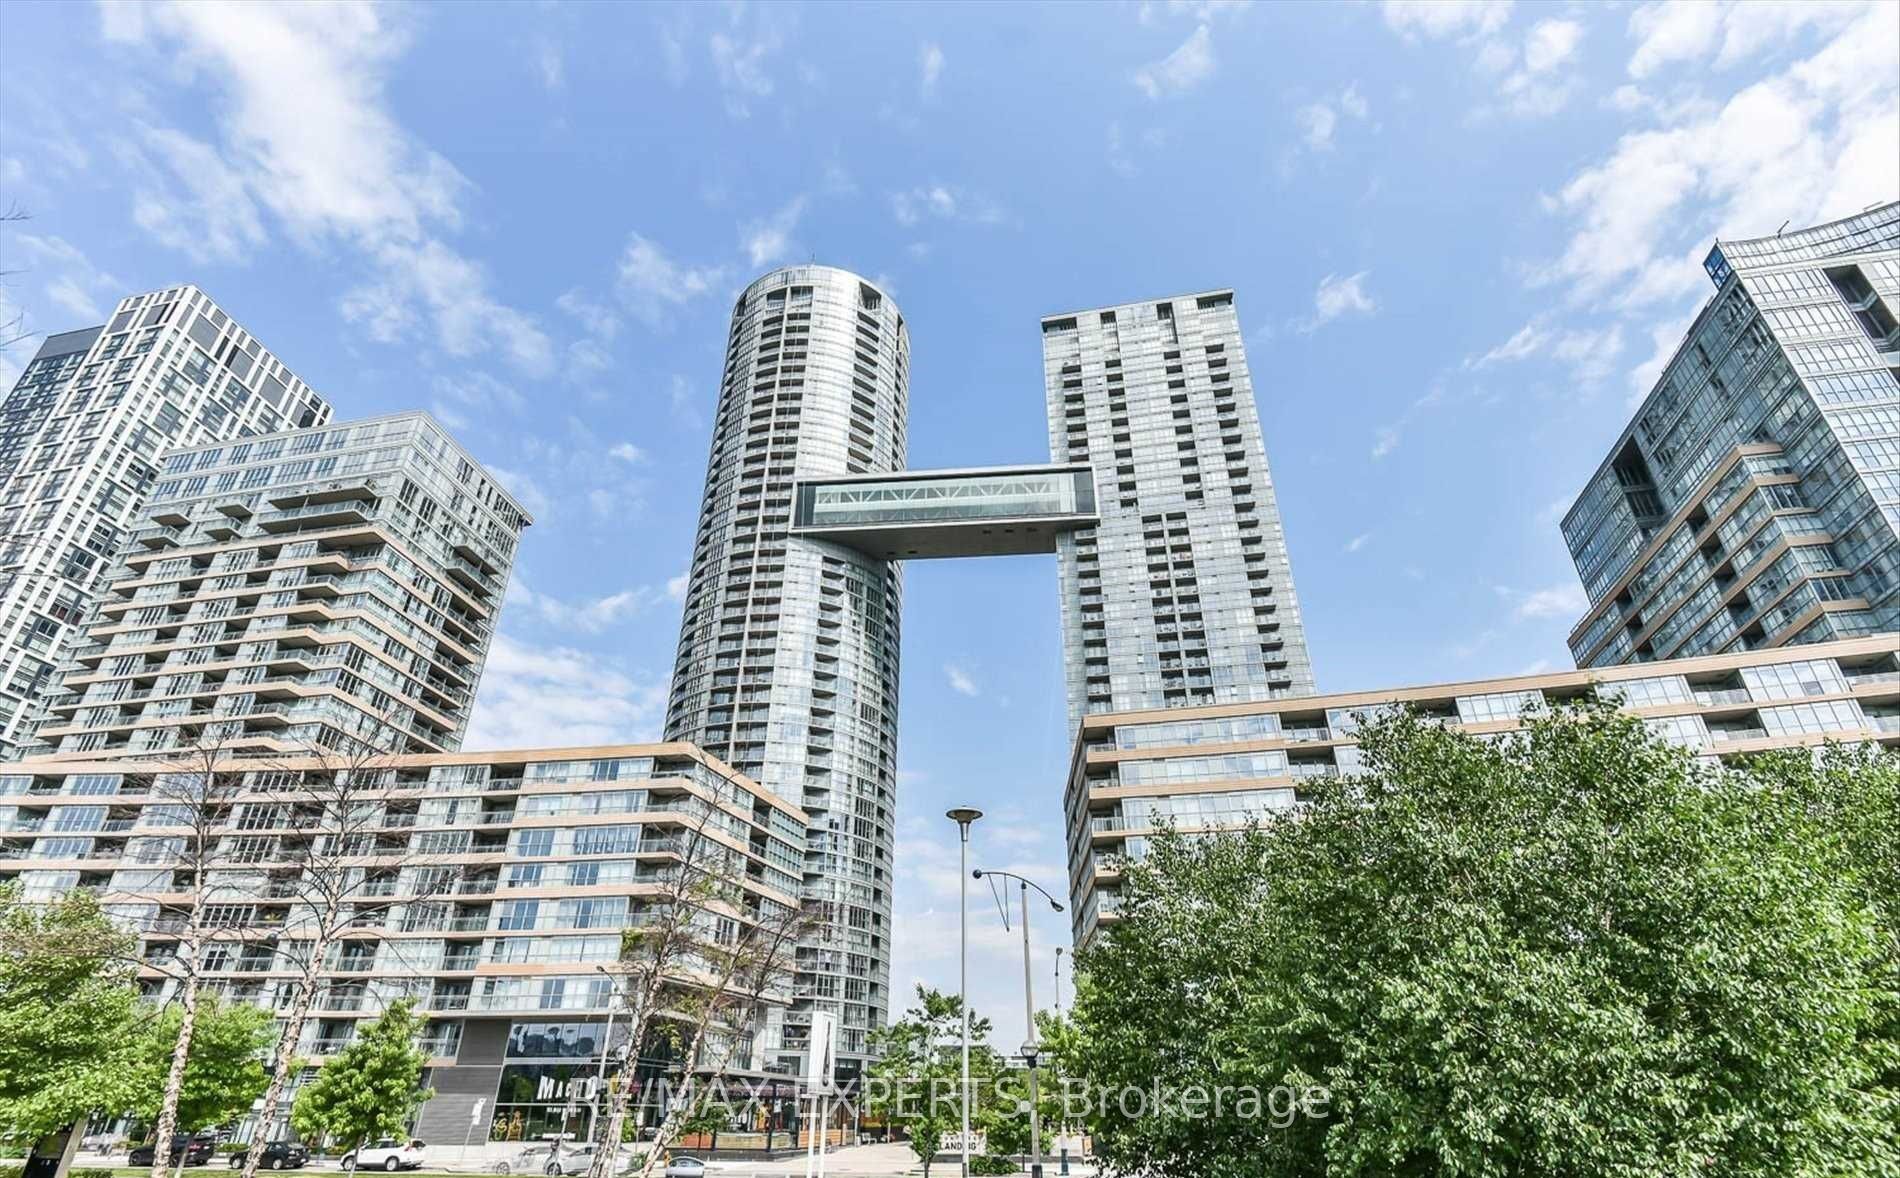 Condo Apt house for sale at 15 Iceboat Terr Toronto Ontario